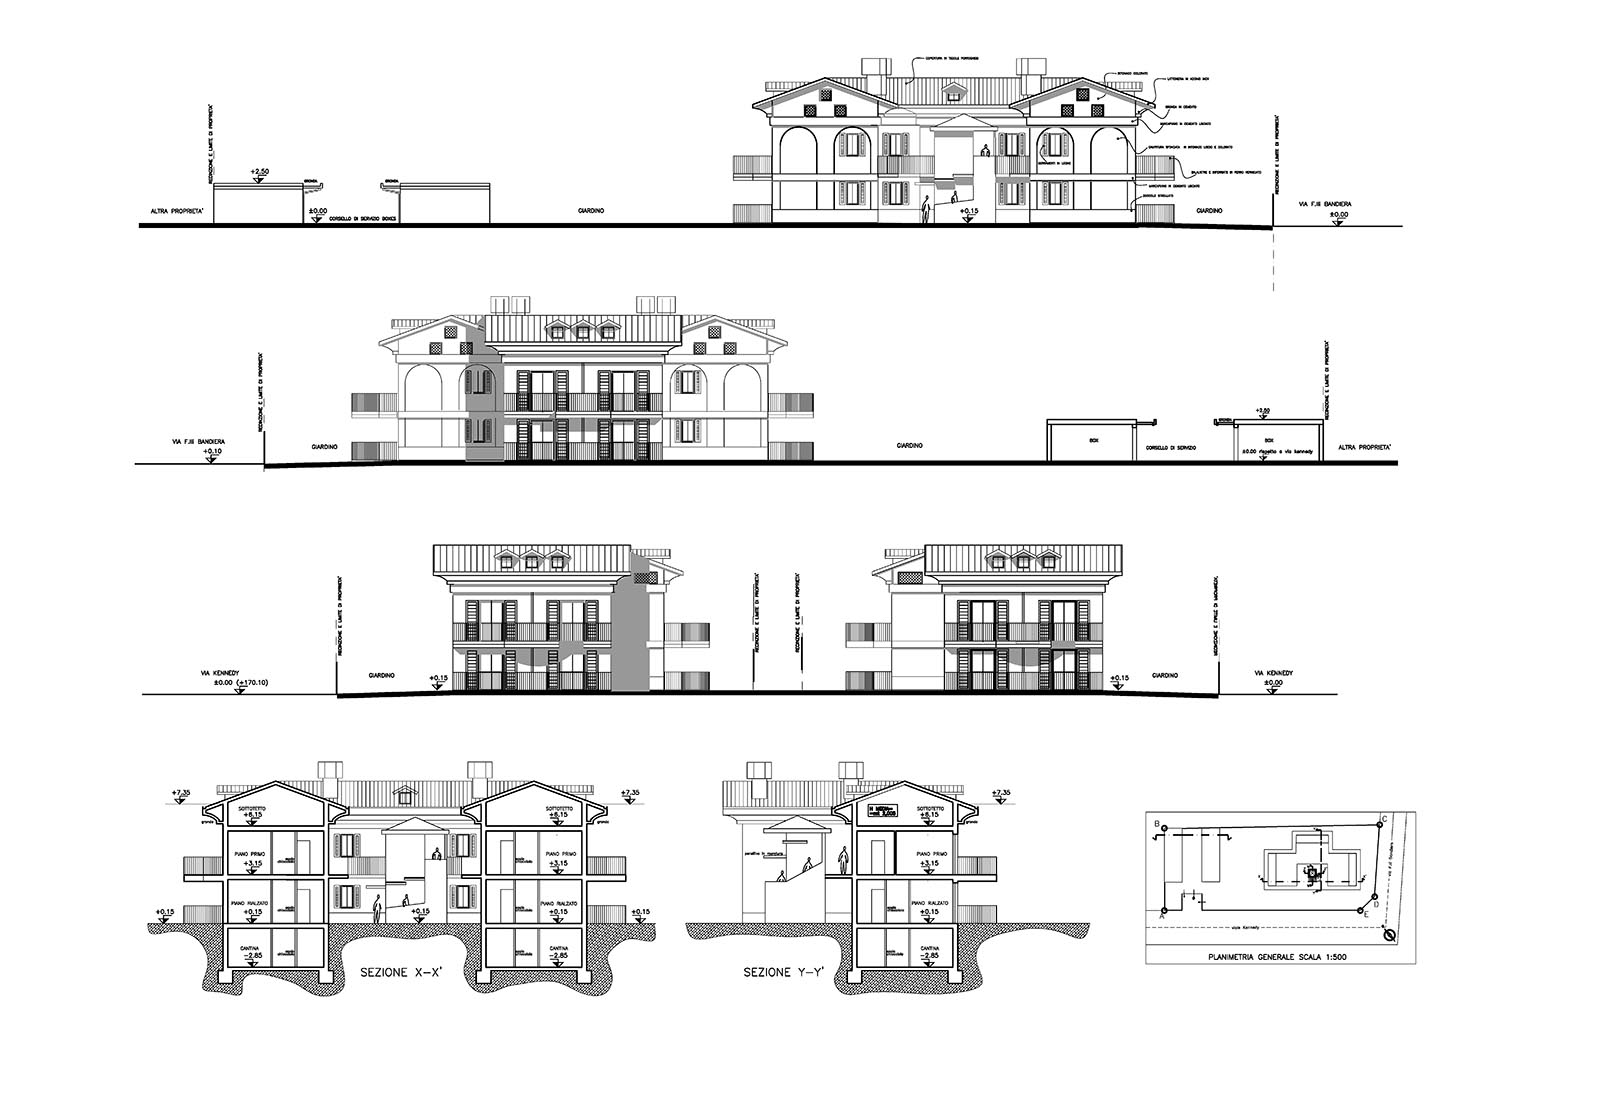 Residential building in Kennedy street in Nerviano - Elevations and sections